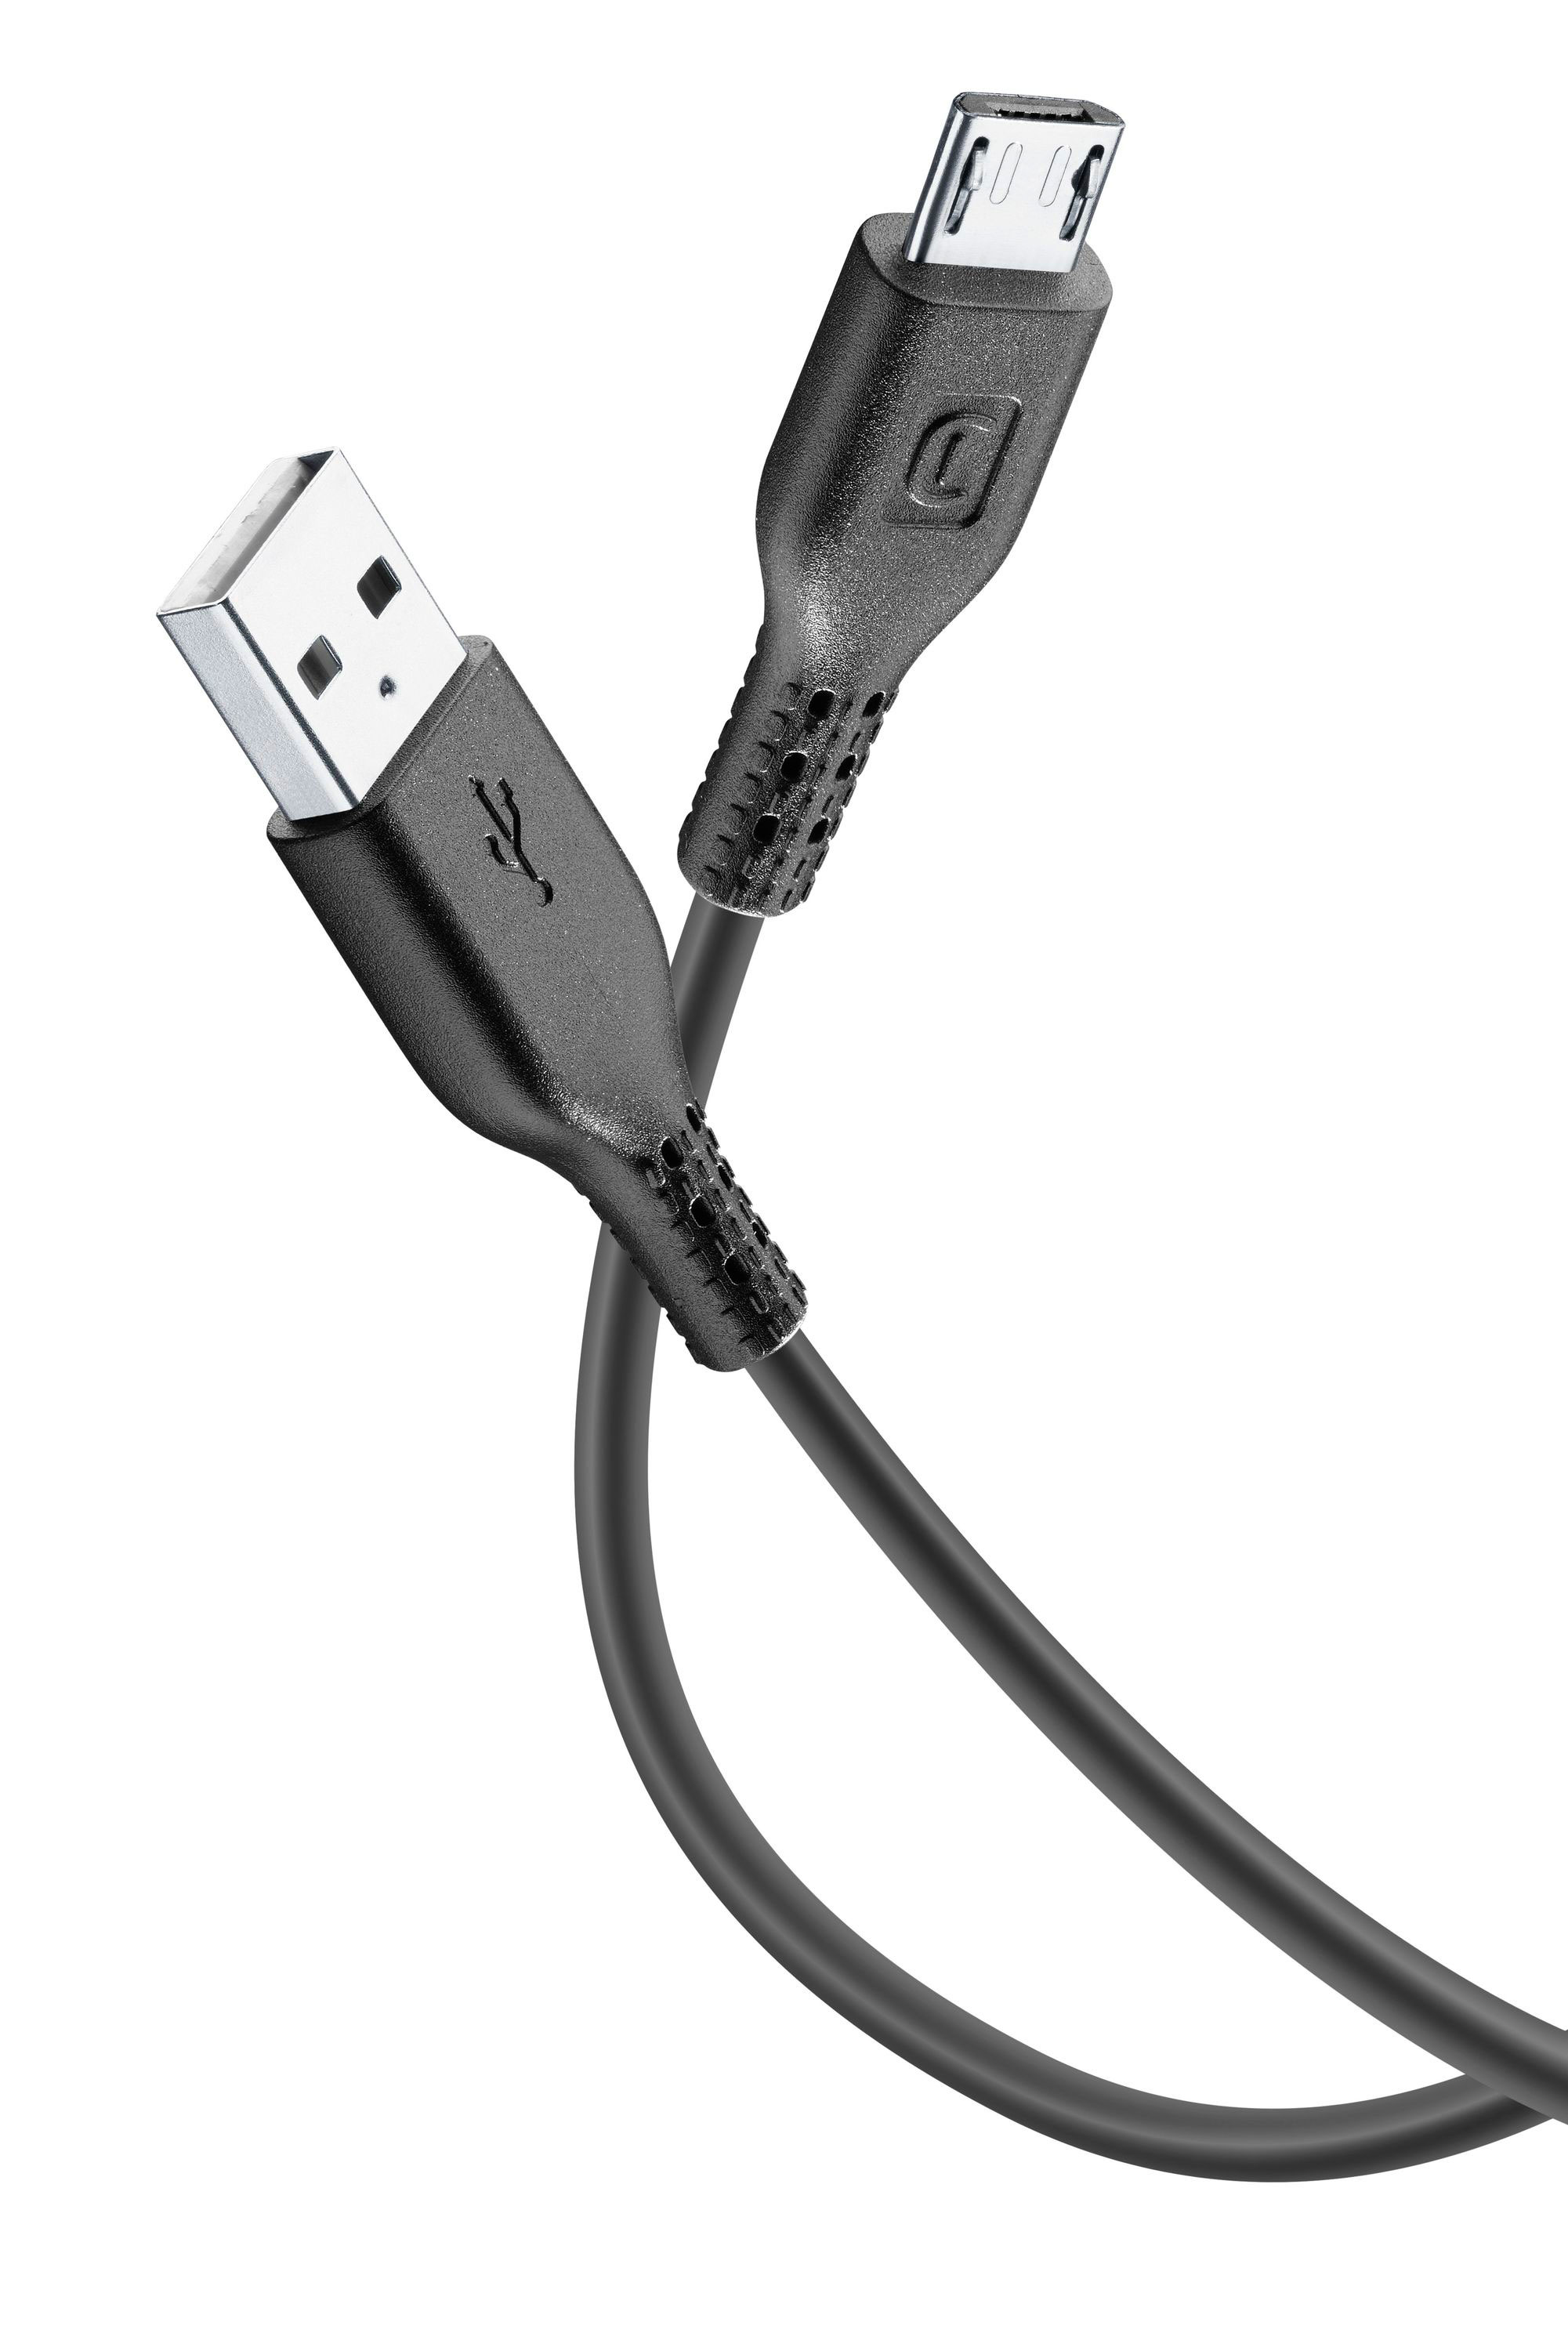 CELLULAR LINE MICRO USB CABLE 1.20M